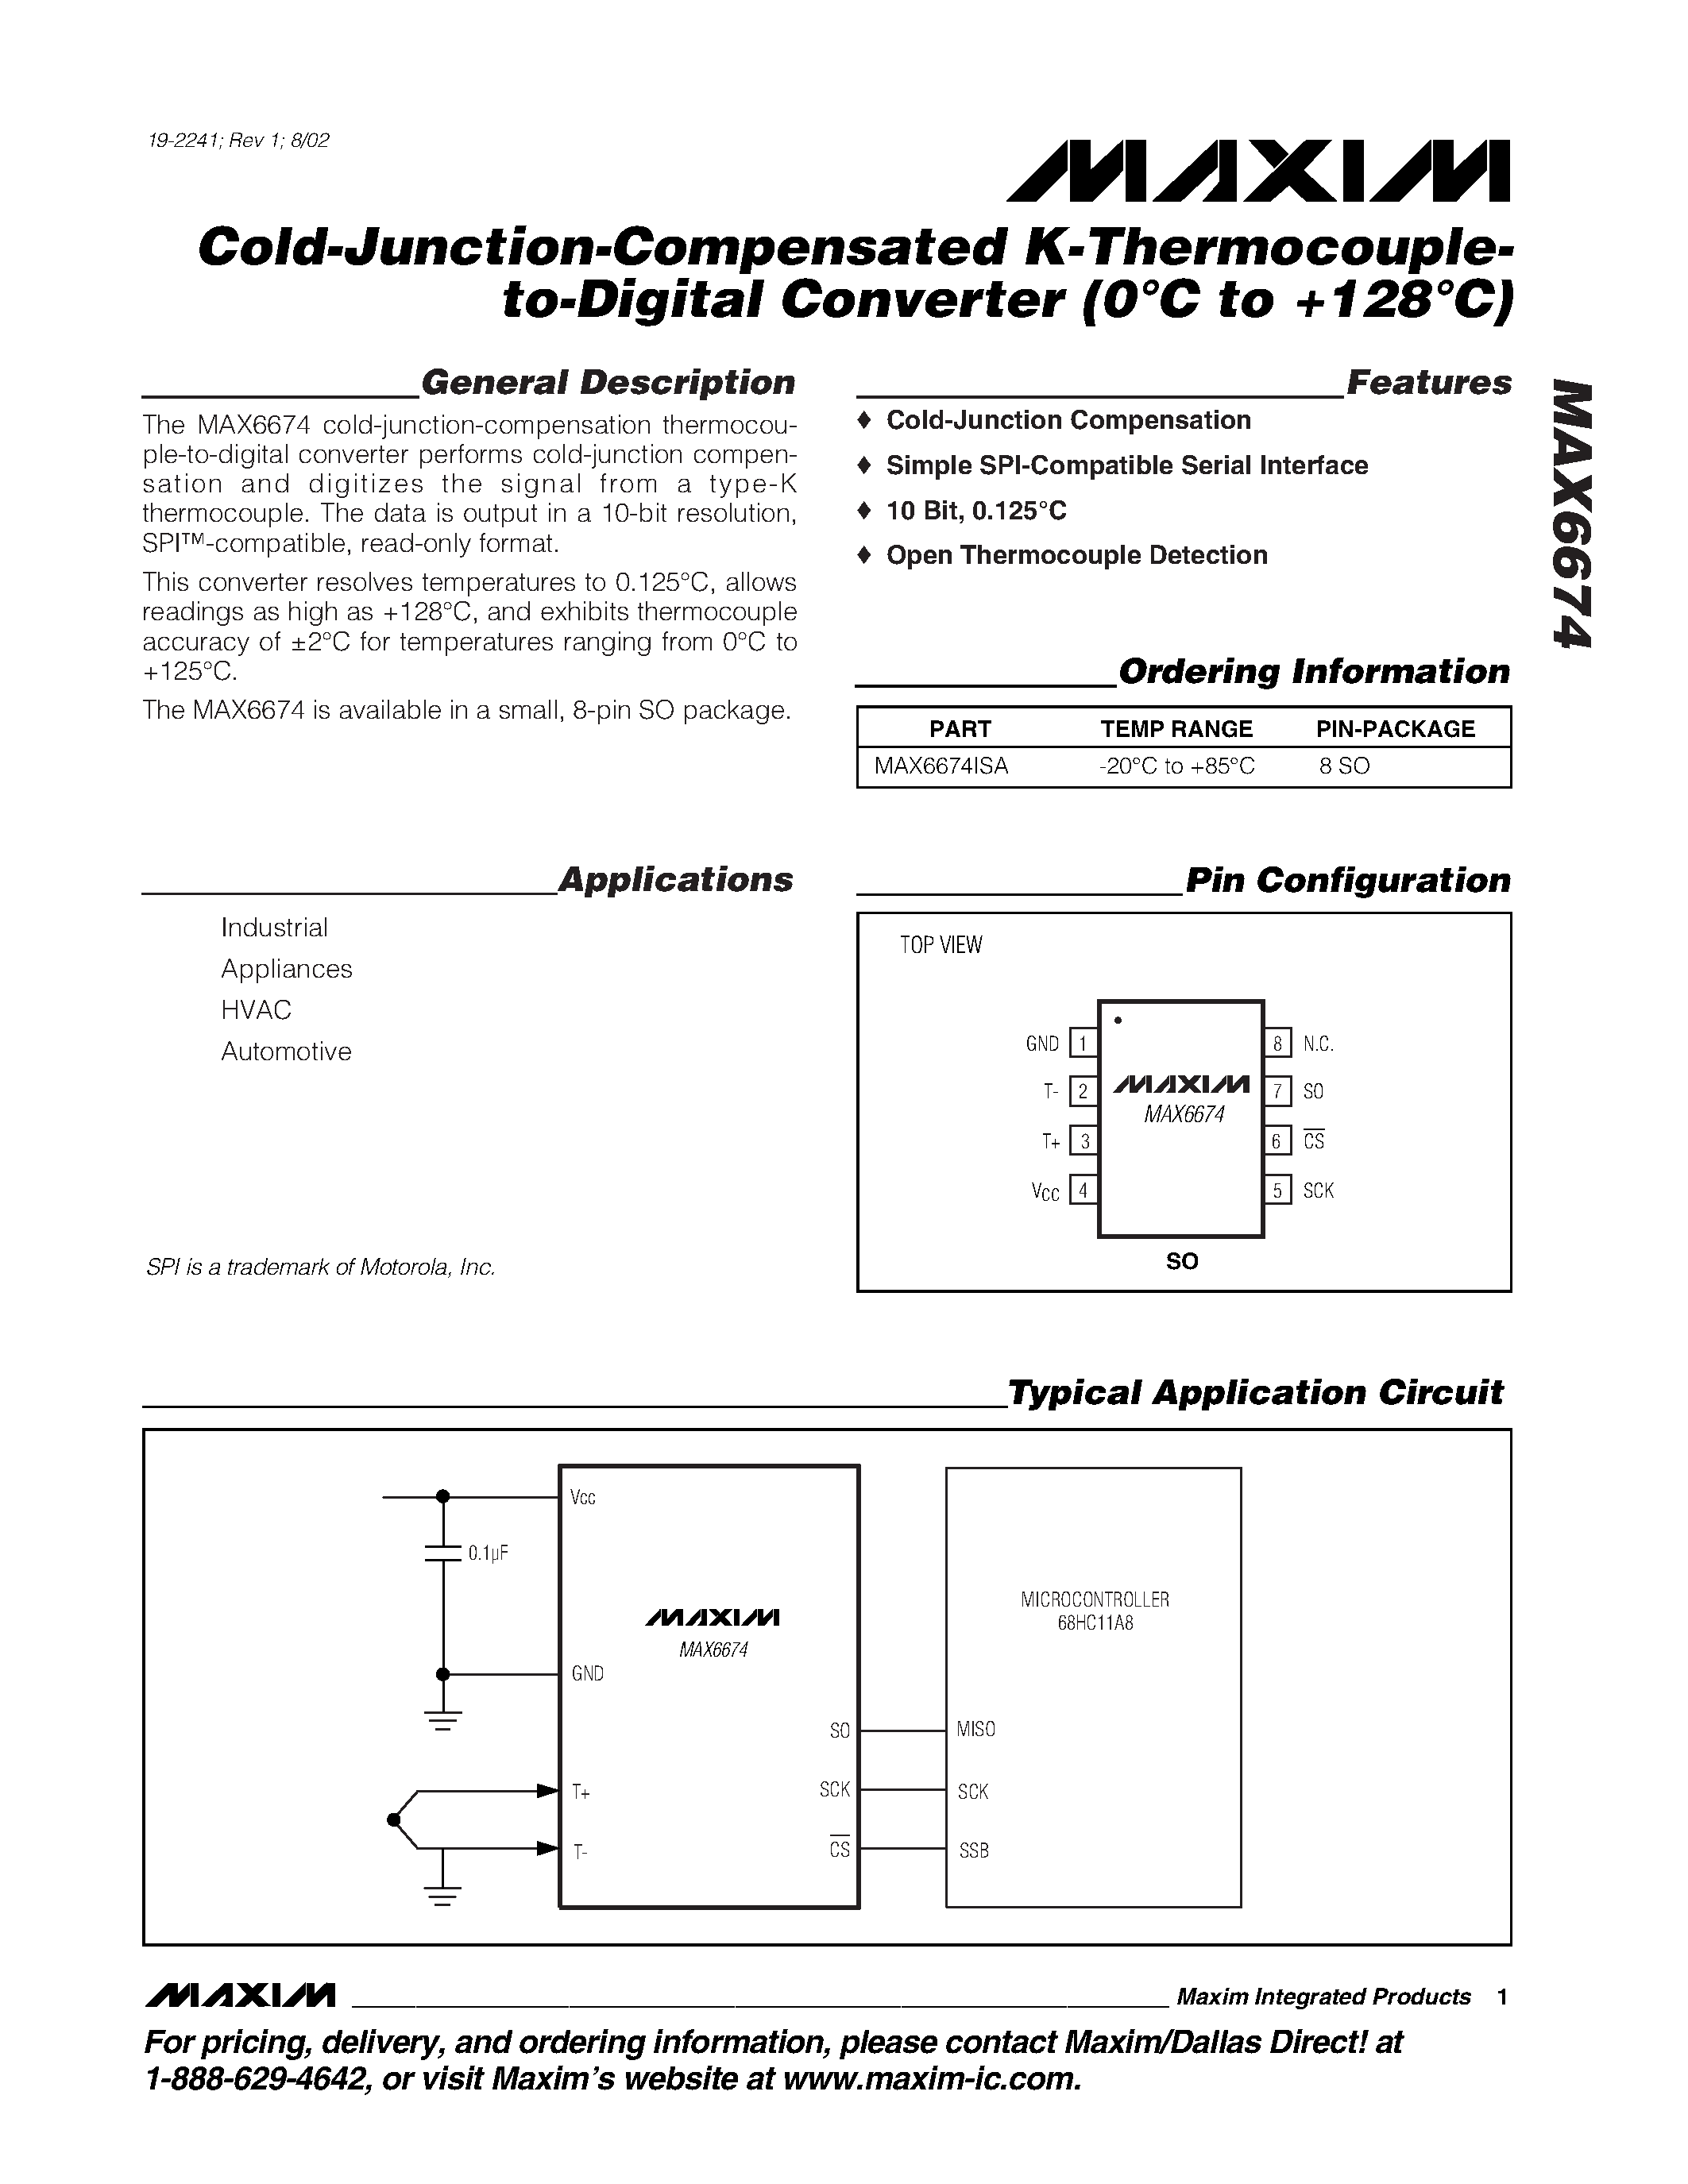 Даташит MAX6674ISA - Cold-Junction-Compensated K-Thermocouple to-Digital Converter (0C to +128C) страница 1